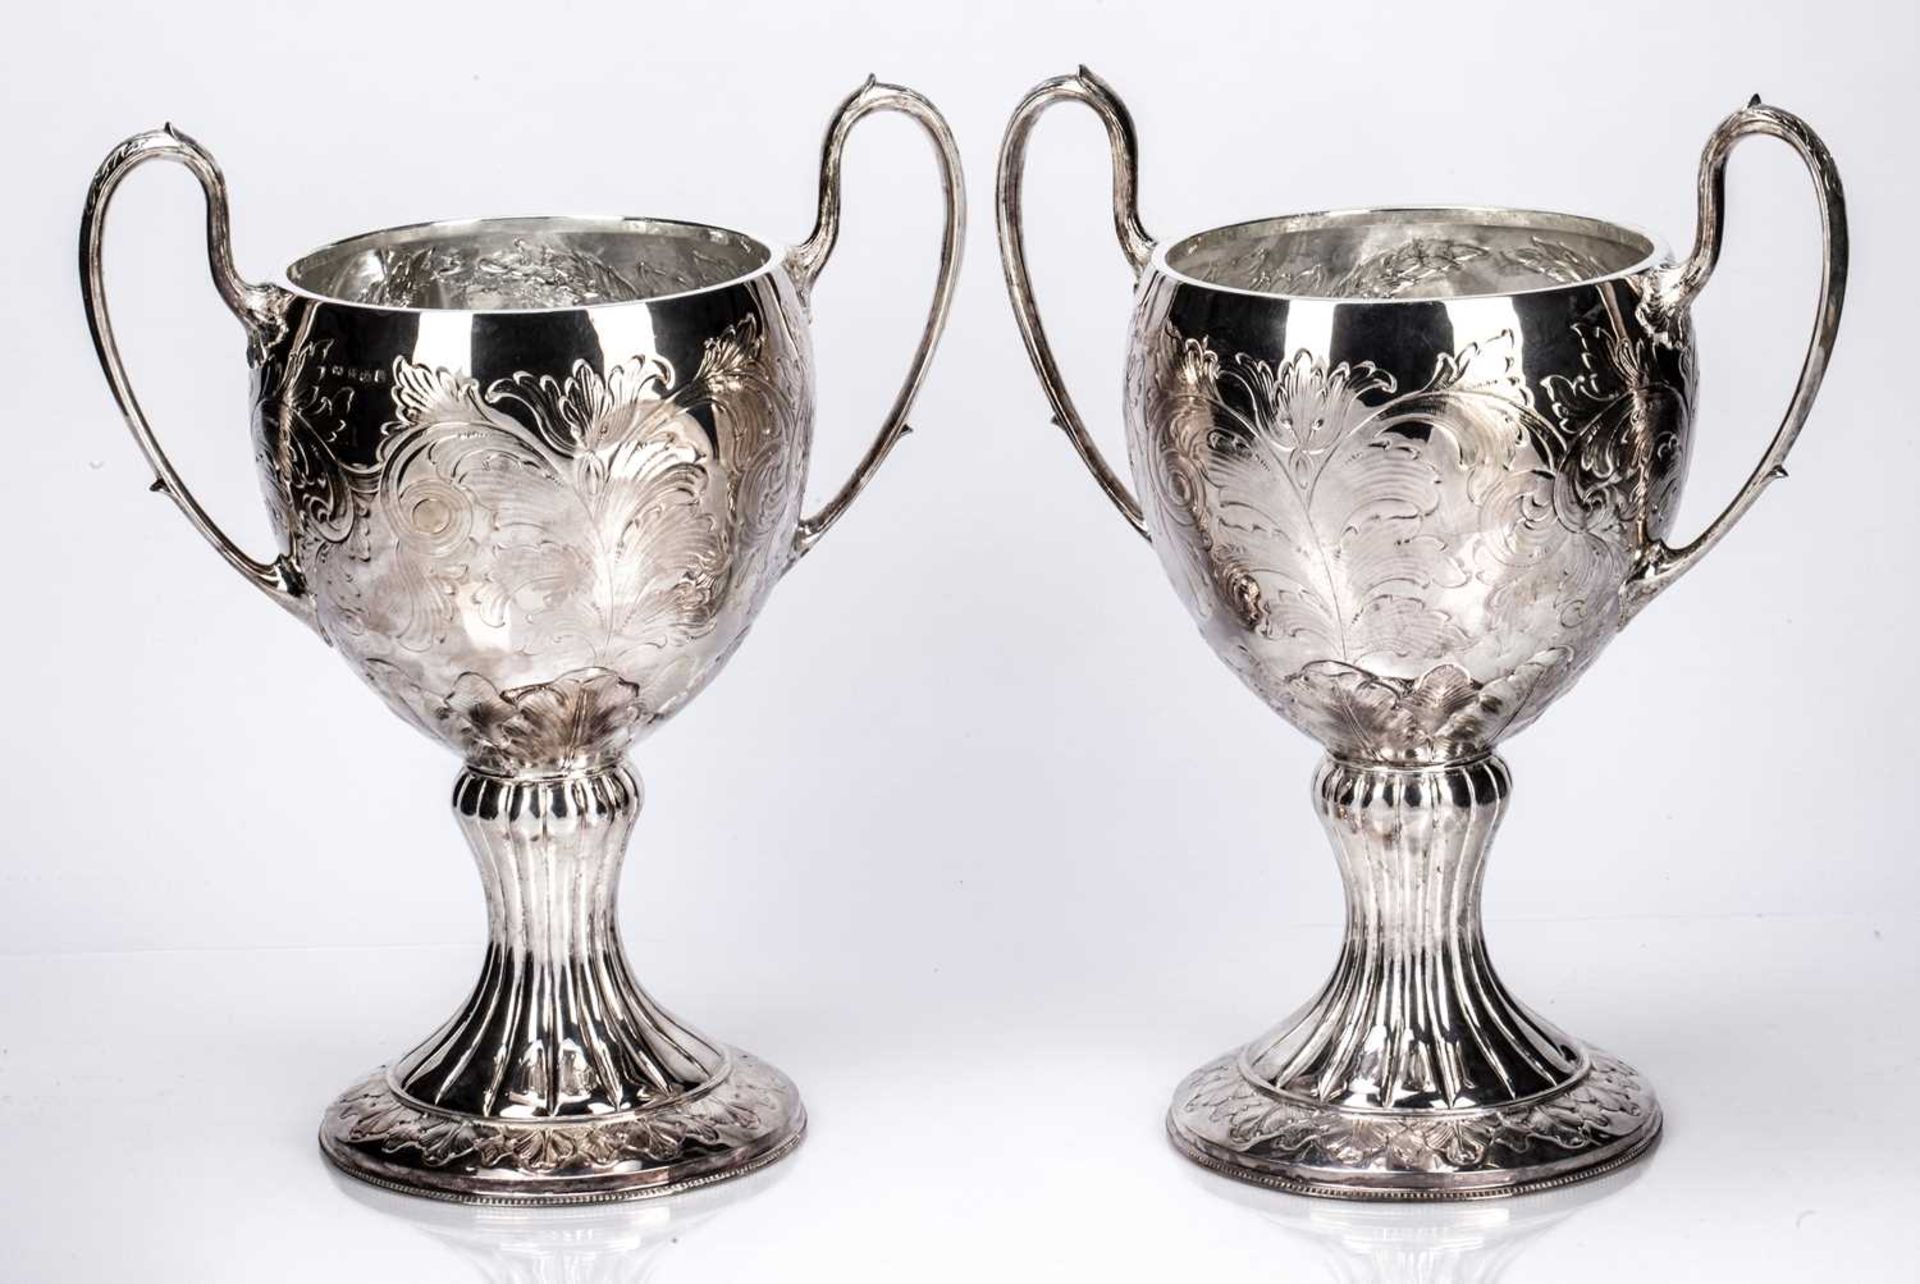 Pair of silver trophy cups with leaf capped trophy handles, on circular bases, bearing marks for R. - Image 2 of 4